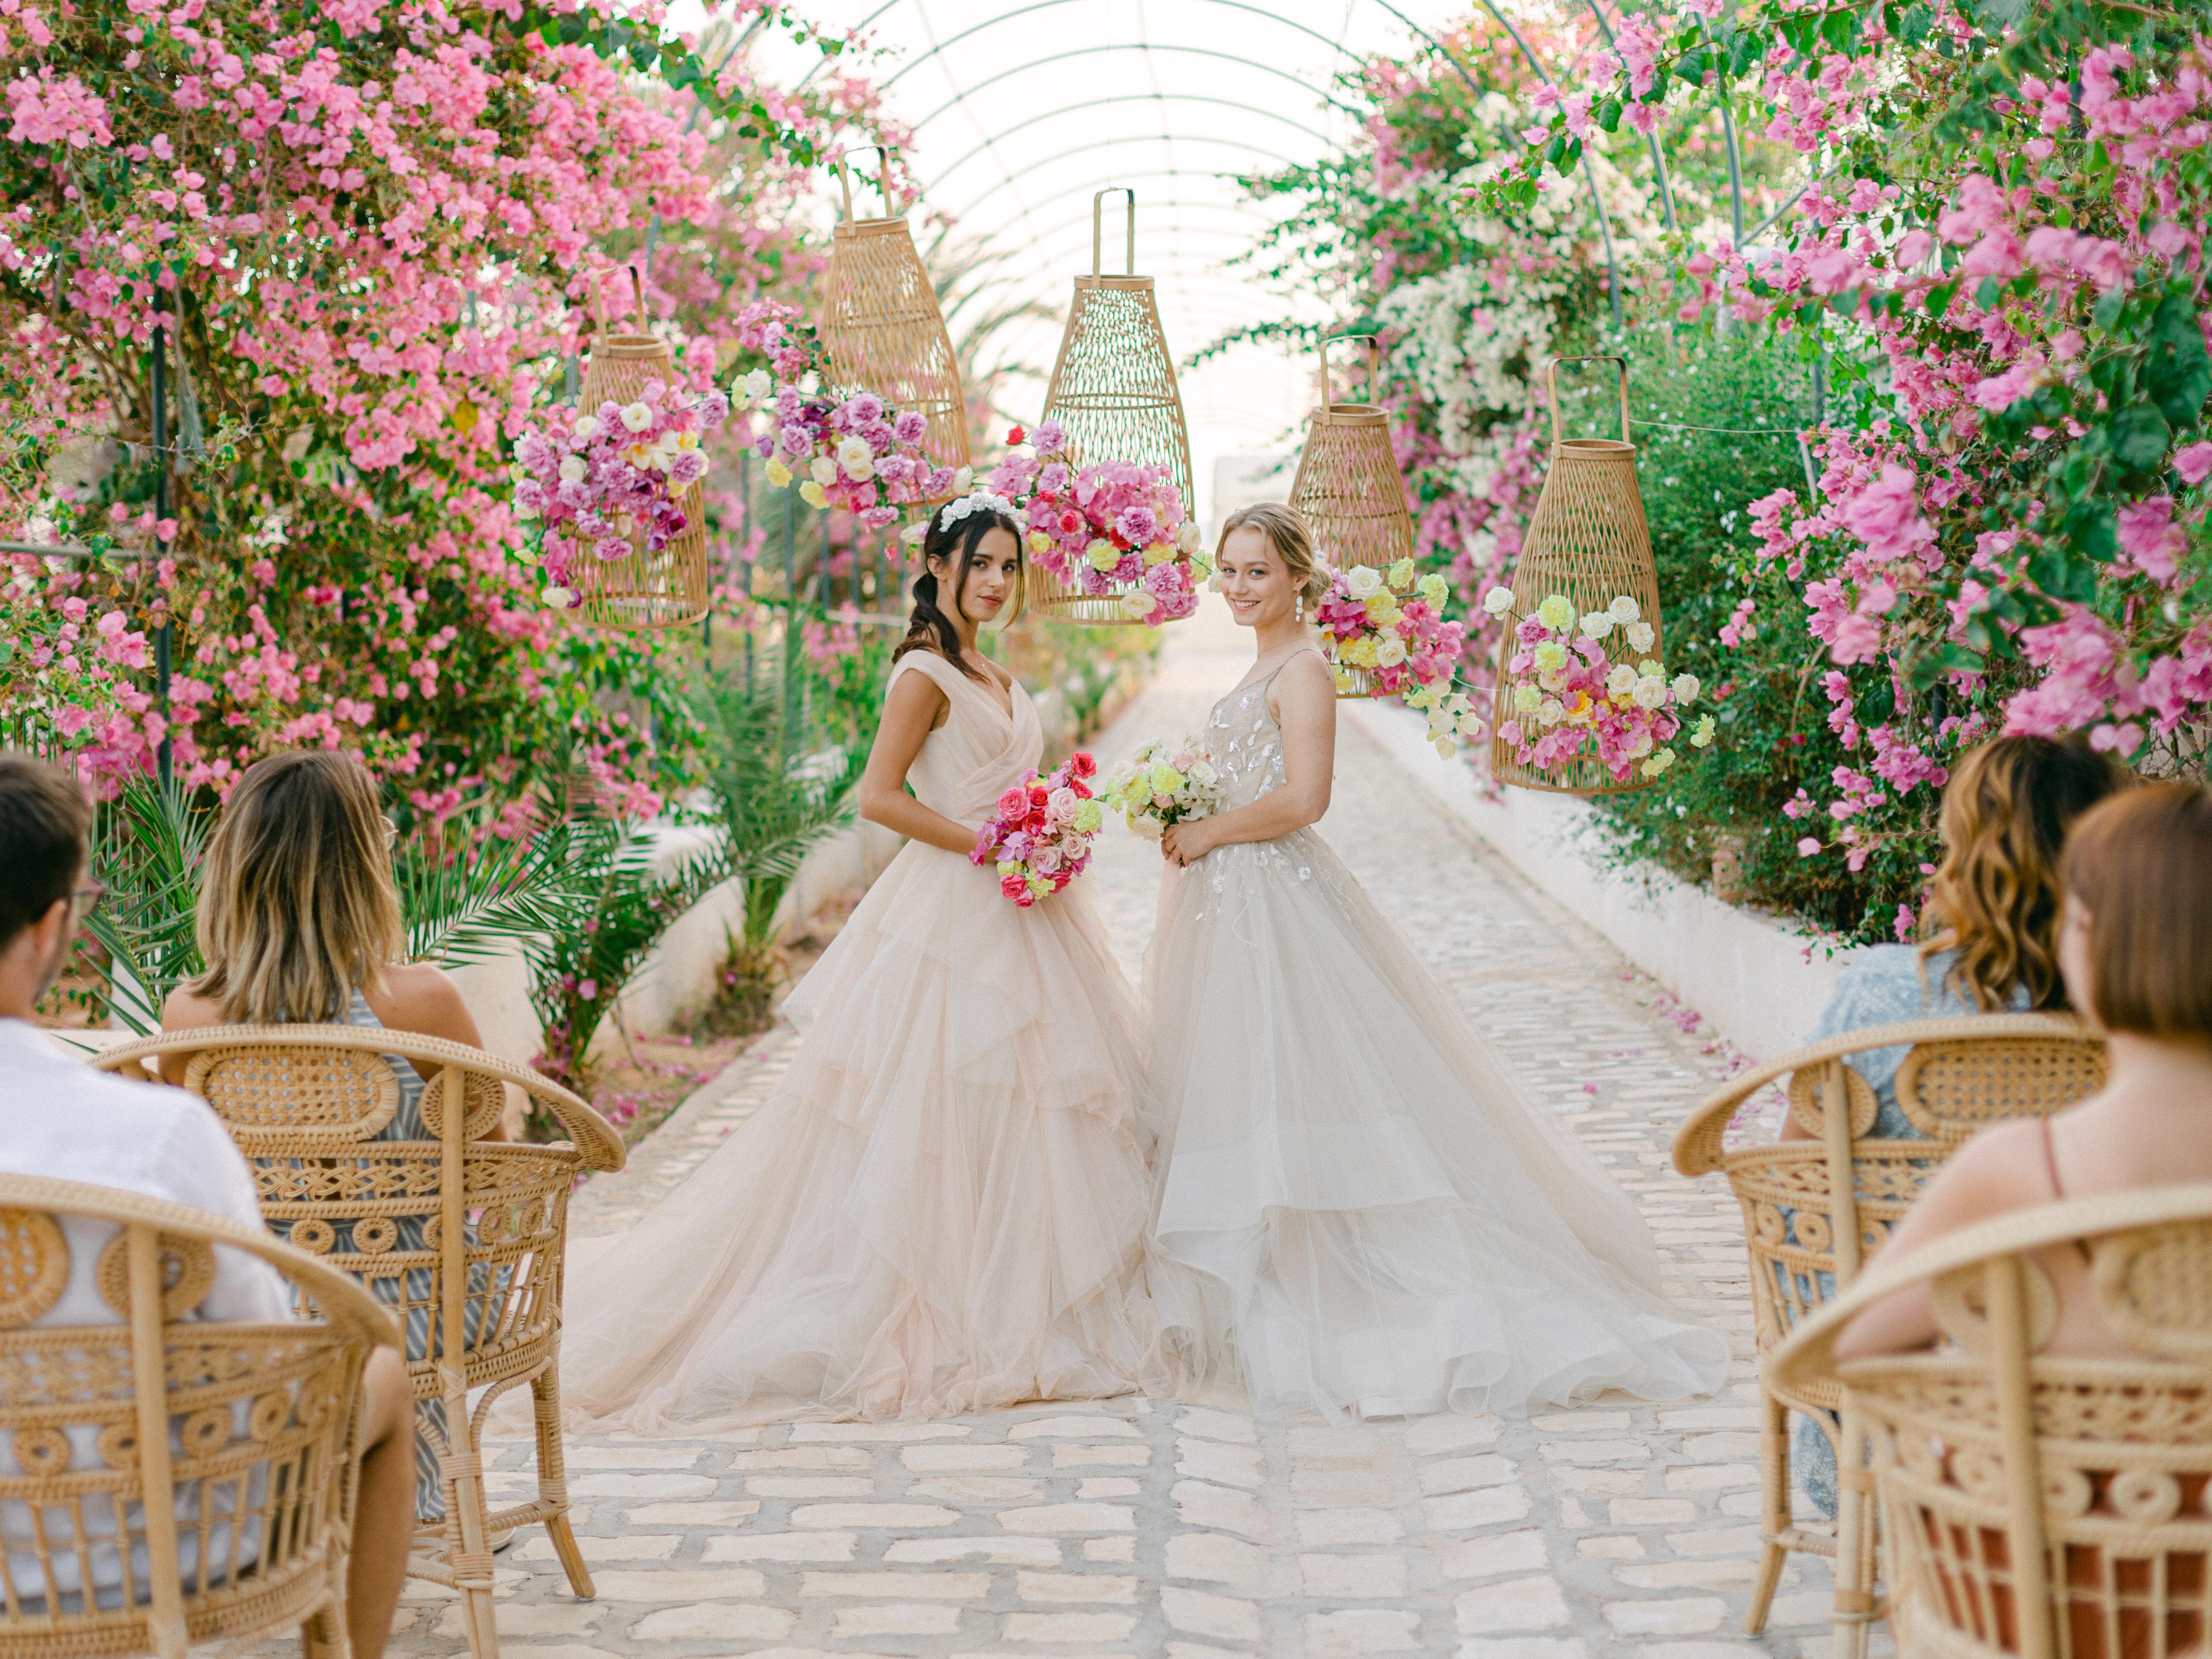 A Modern Love Story In Traditional Tunisia Inspired By The Bougainvilleas